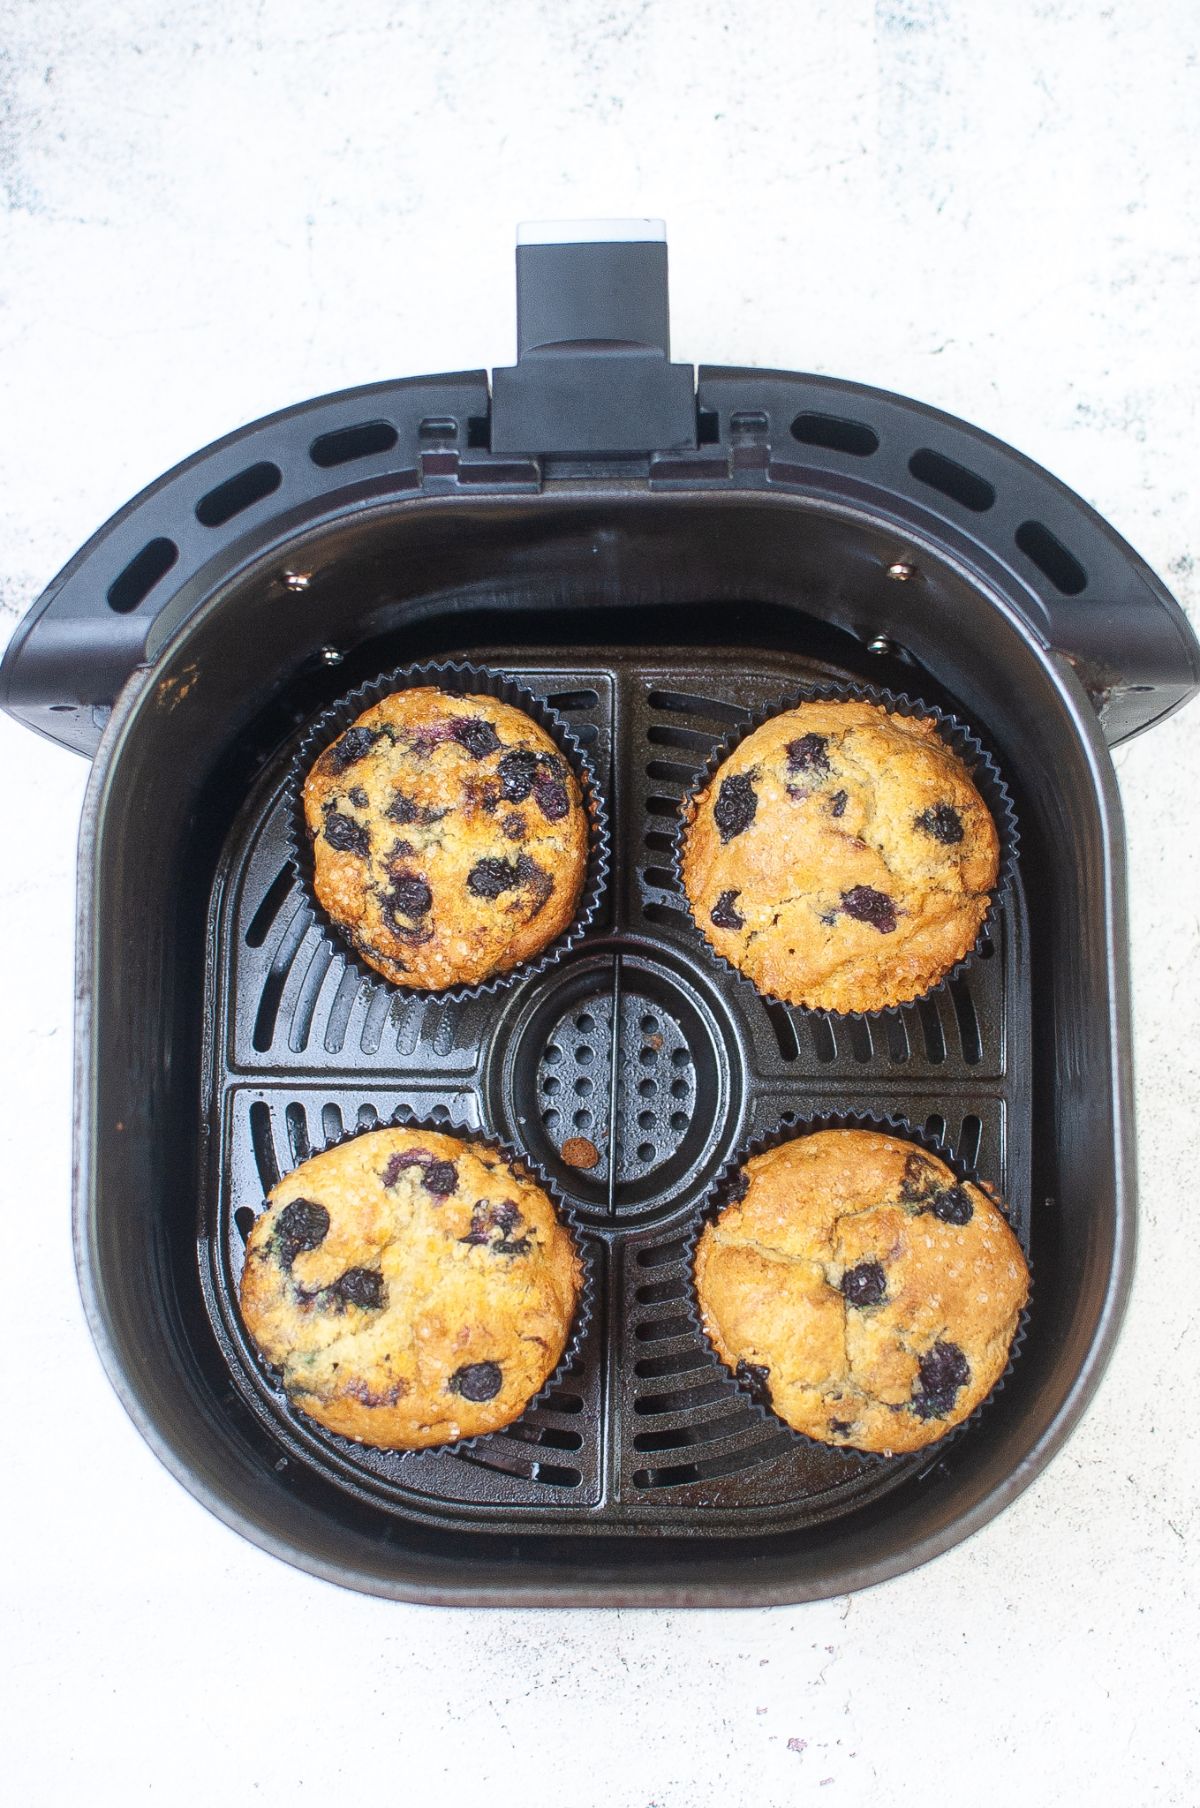 Blueberry muffins inside the Air Fryer.